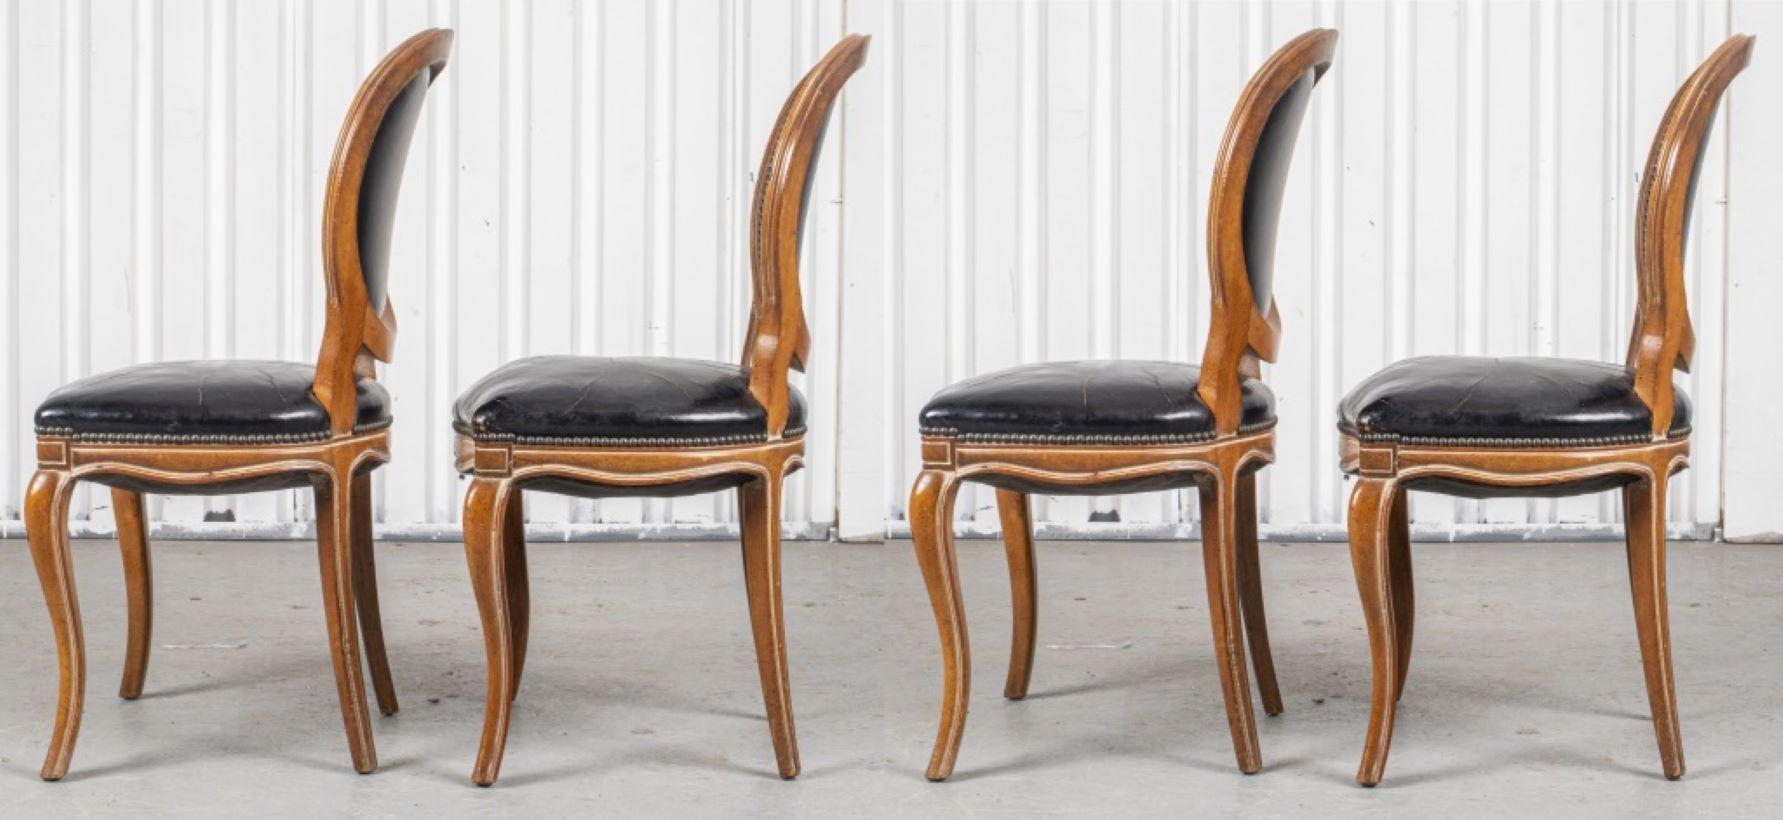 Set of four French Provincial style fruitwood side chairs, upholstered with black leather. 36.5” H x 19” W x 20” D x Seat 19